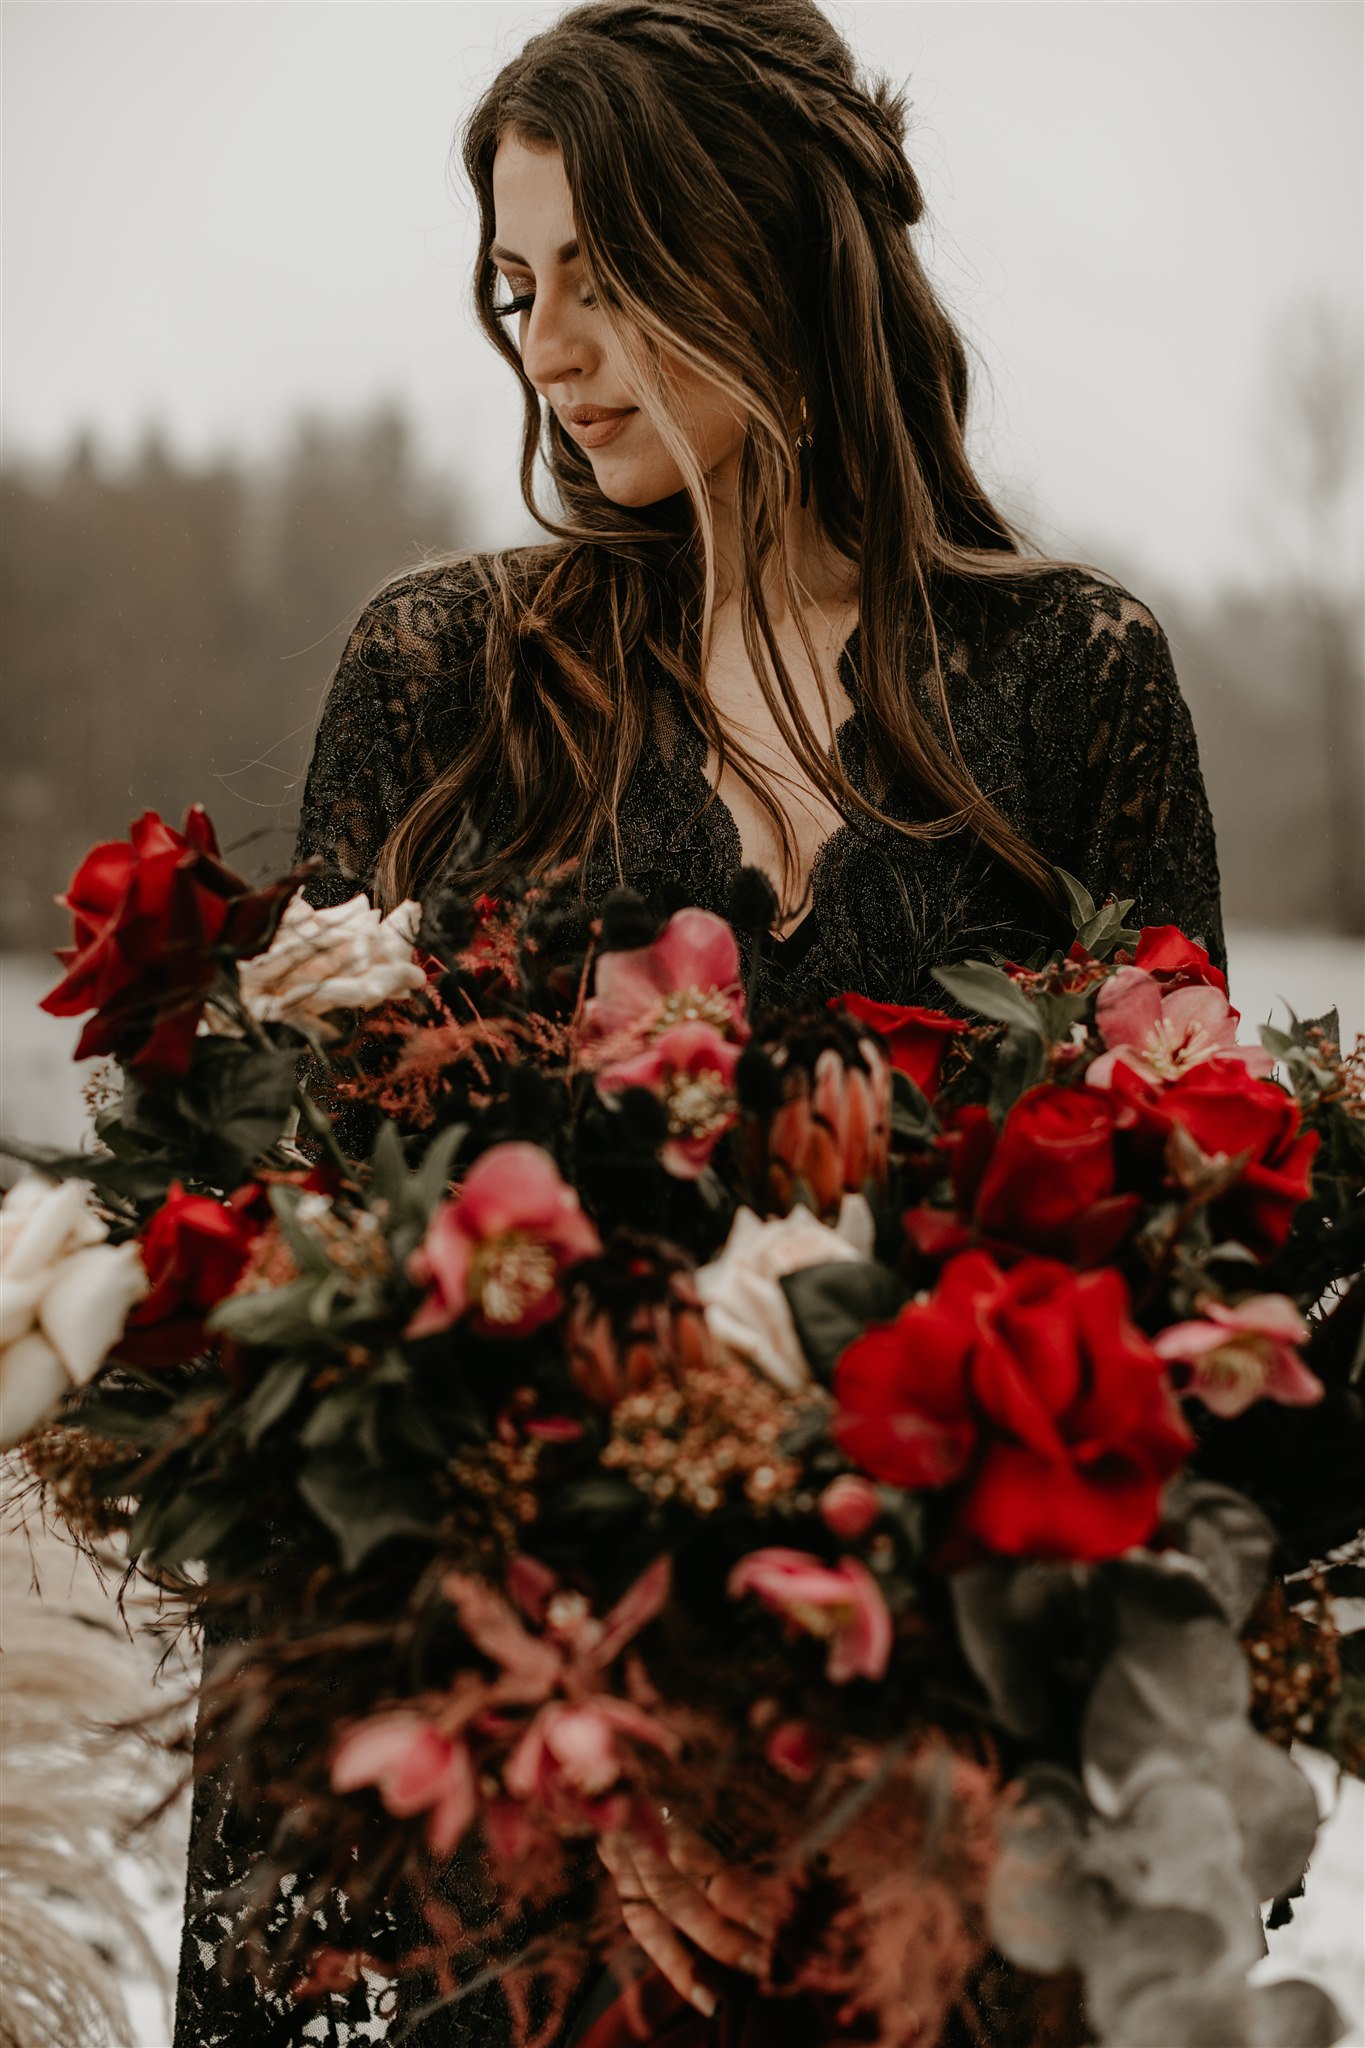 Boho bride with long flowing wedding hair in black wedding dress with large red wedding bouquet